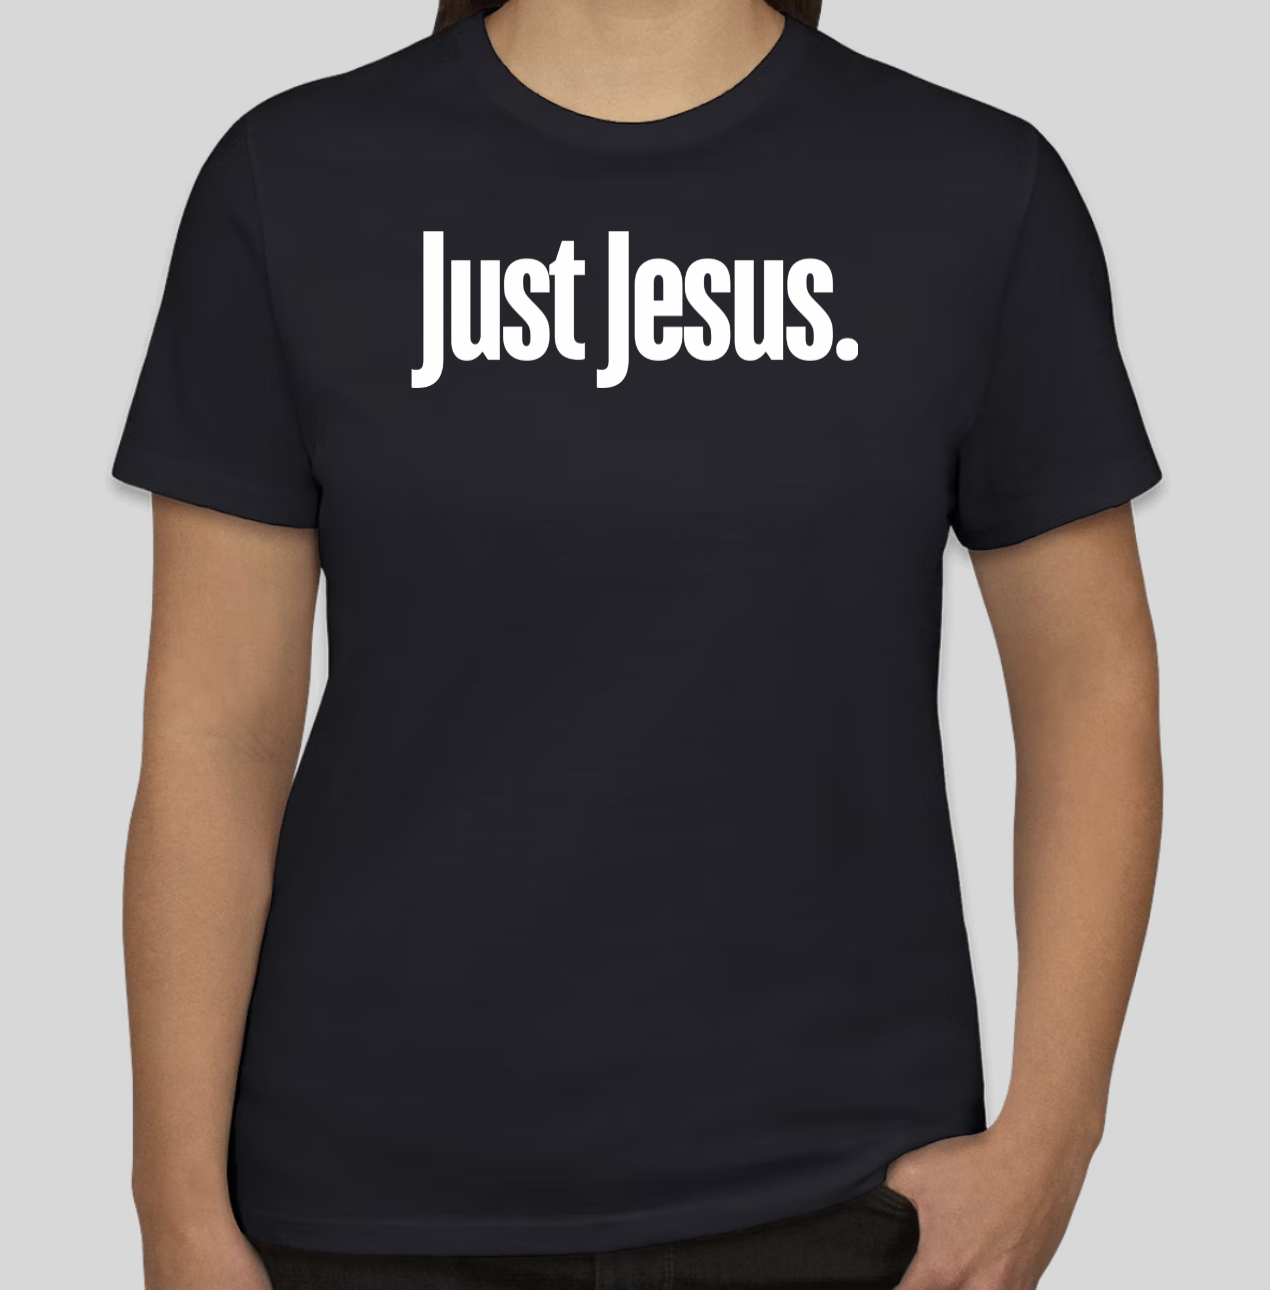 The Just Jesus t-shirt features the holy name of Jesus in straightforward text. The slim BHS logo has been applied to the back of the t-shirt.